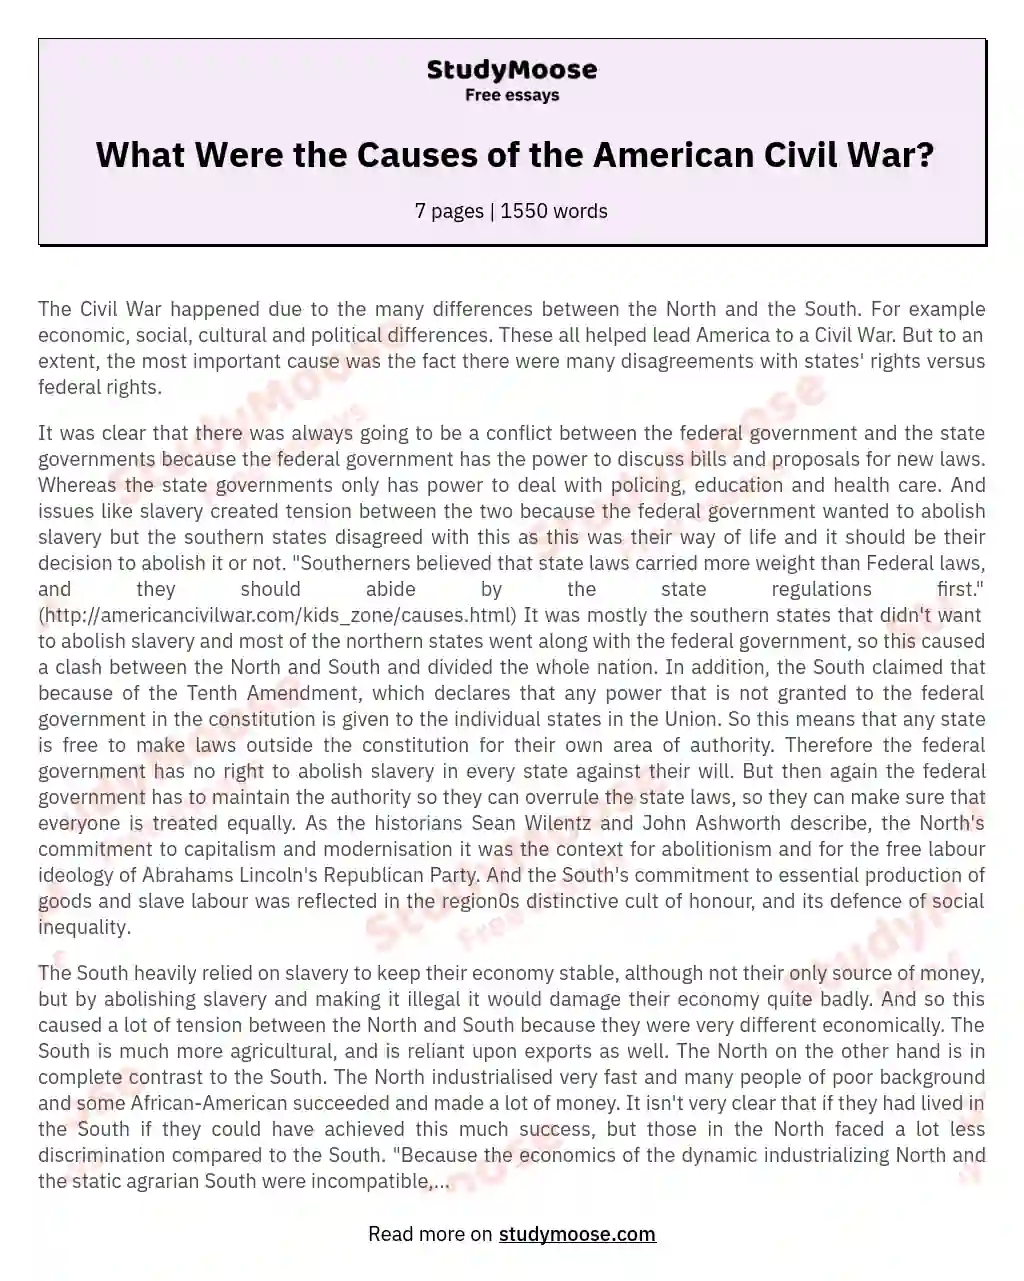 What Were the Causes of the American Civil War? essay